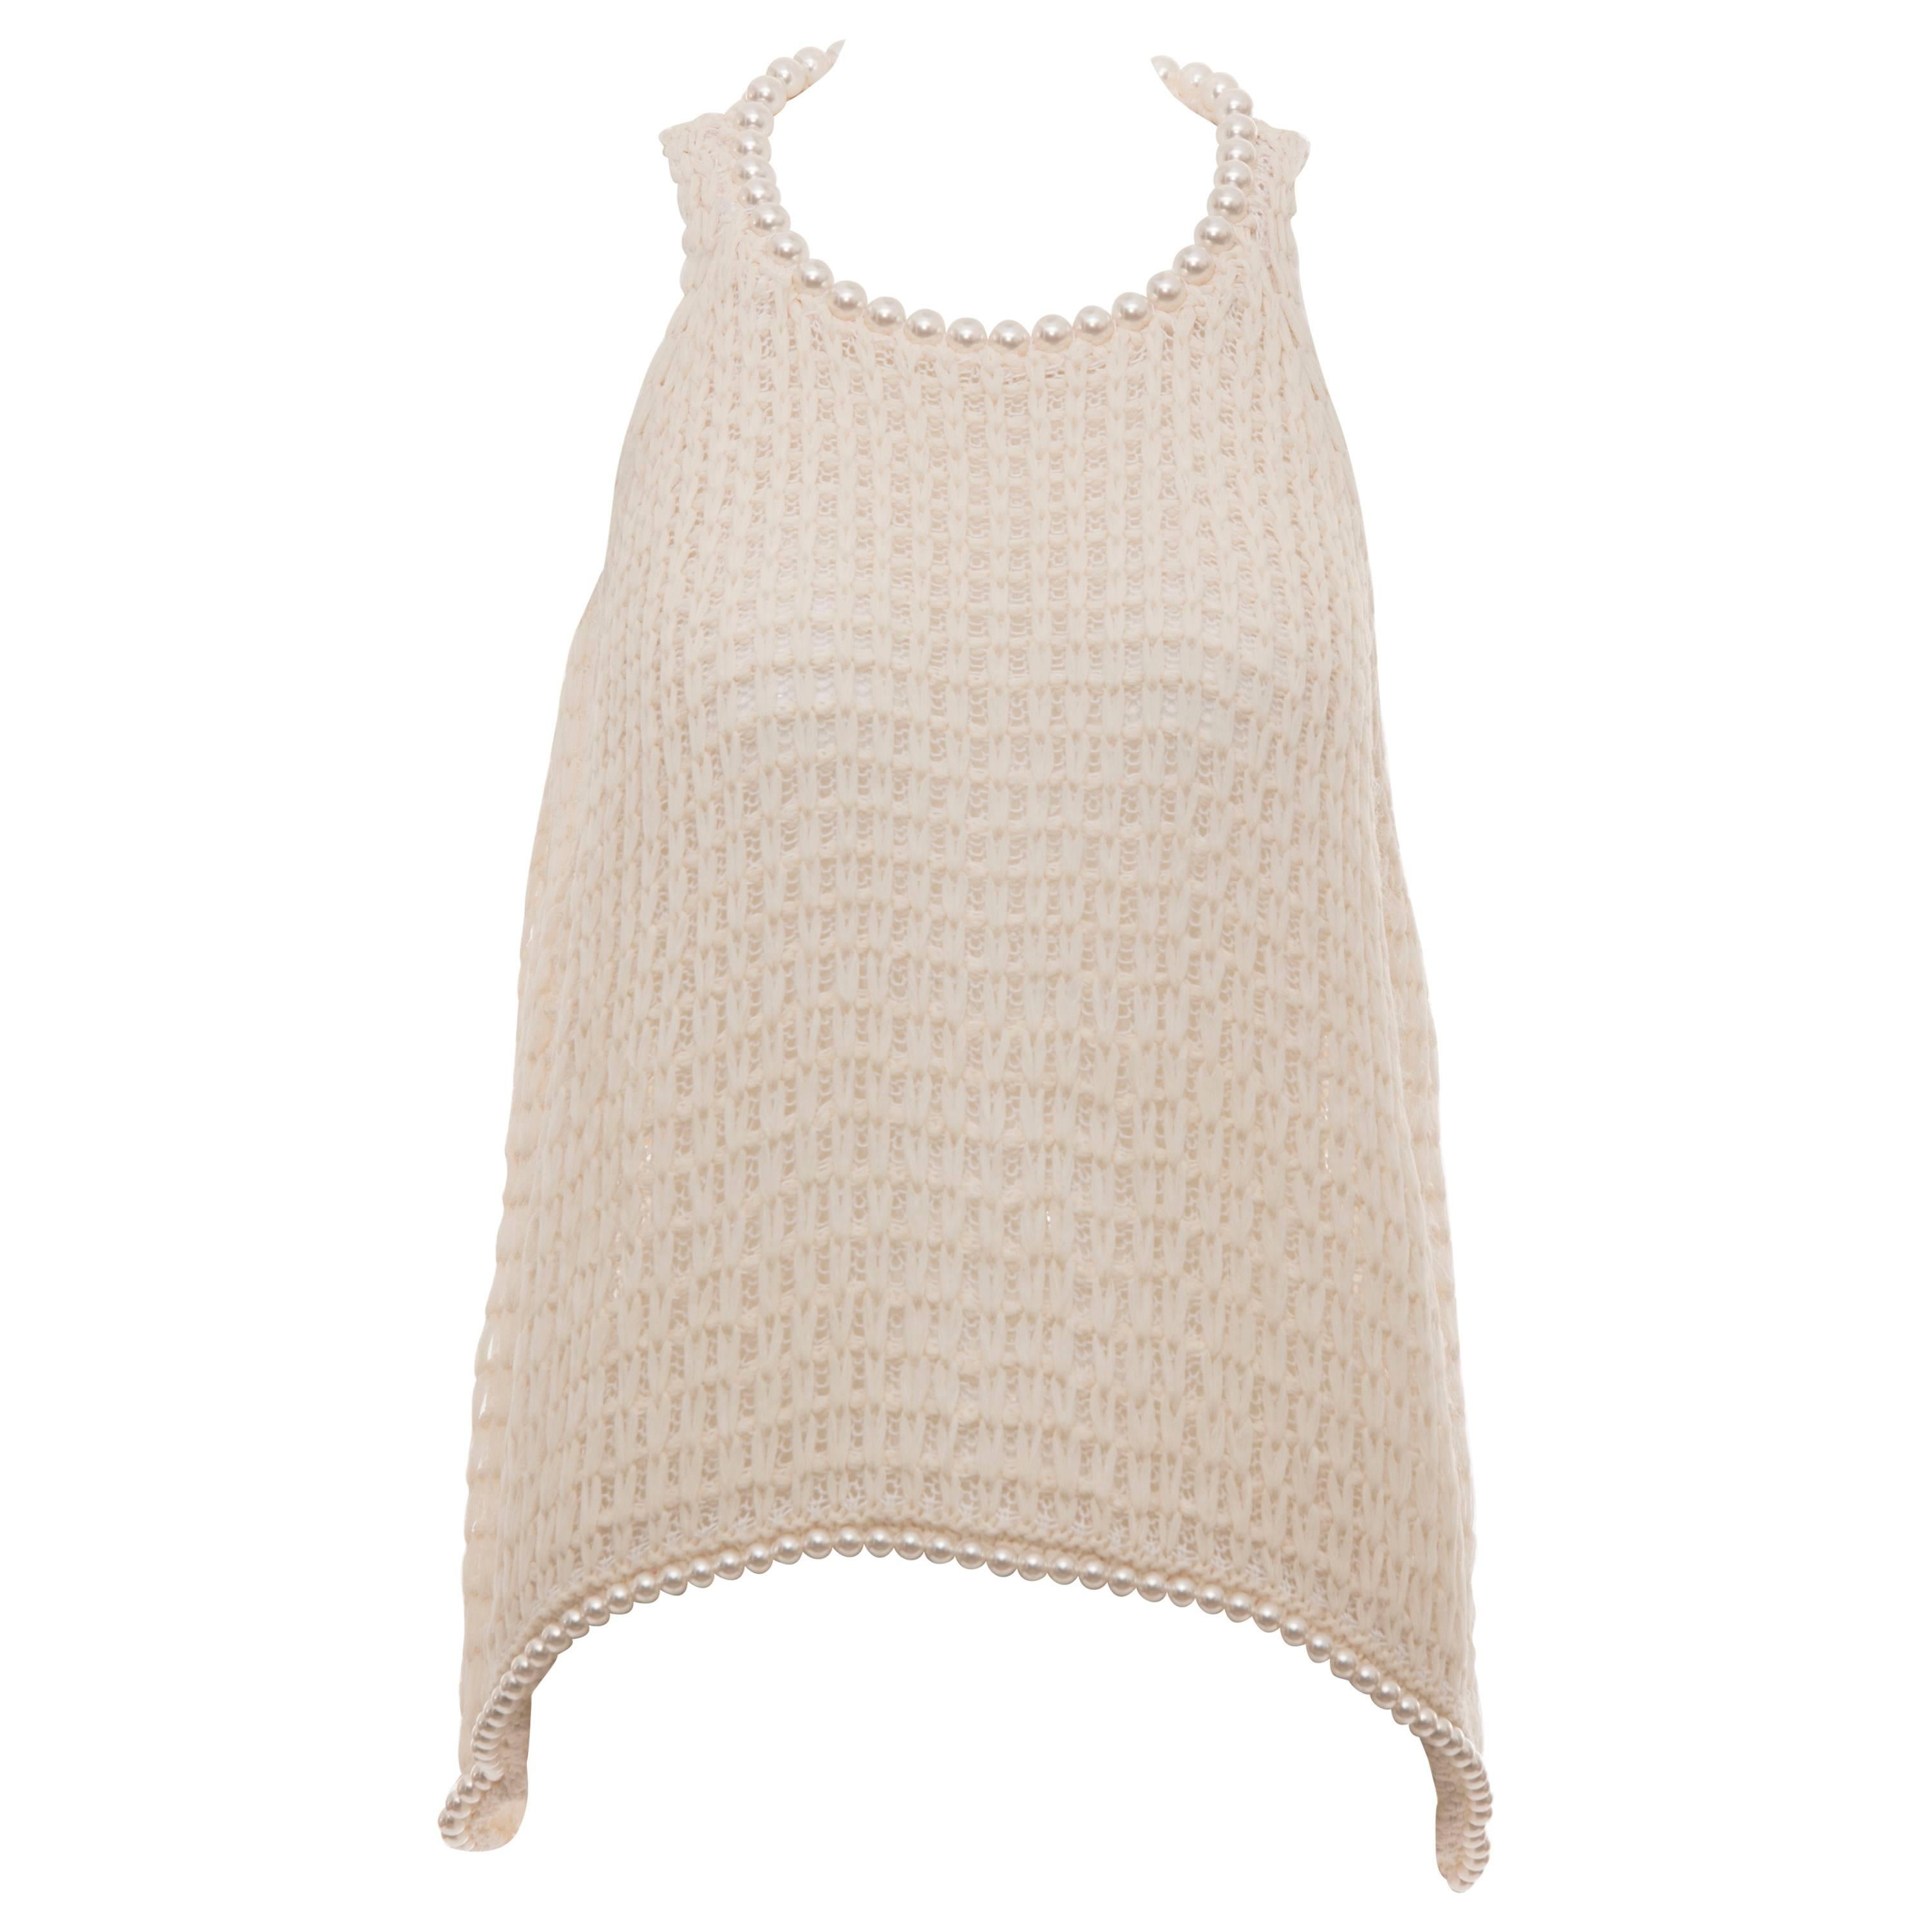 Chanel Cream Silk Blend Open Knit Top With Pearl Embellishments, Spring 2009 For Sale